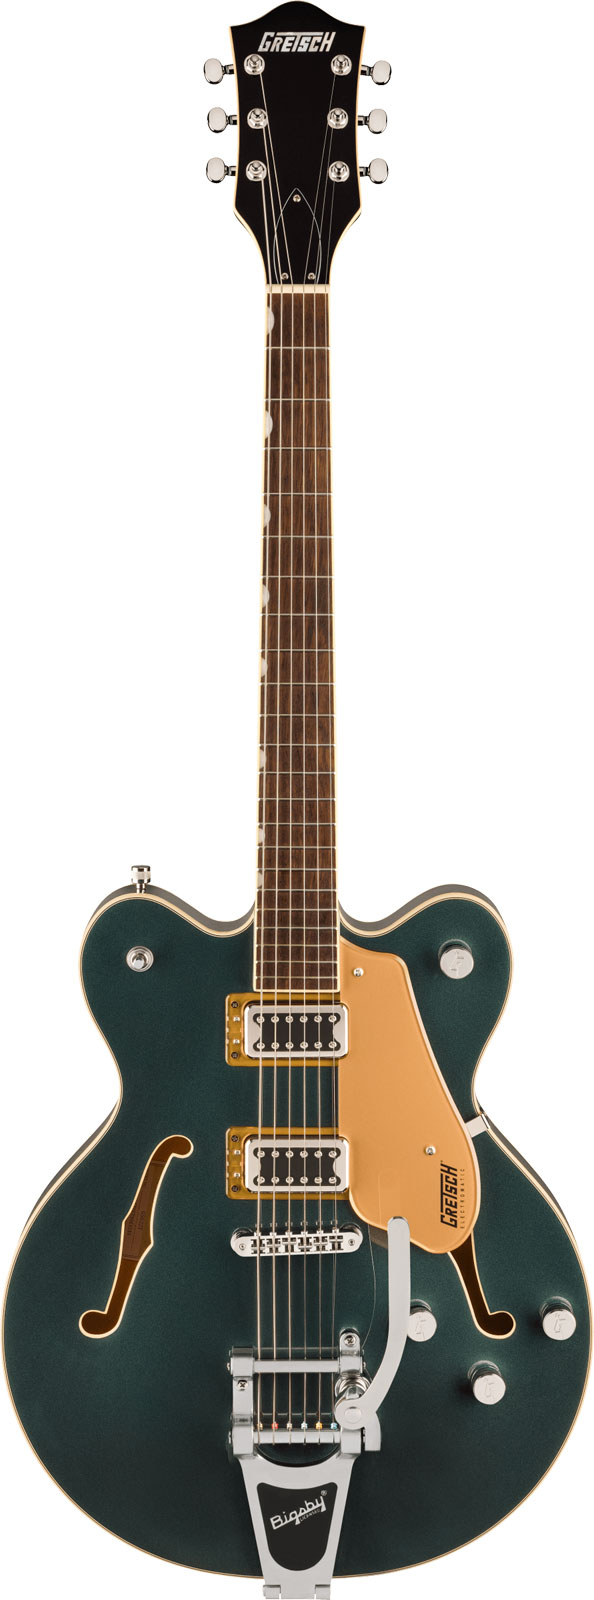 GRETSCH GUITARS G5622T ELECTROMATIC CENTER BLOCK DOUBLE-CUT WITH BIGSBY, LAUREL FINGERBOARD, CADILLAC GREEN